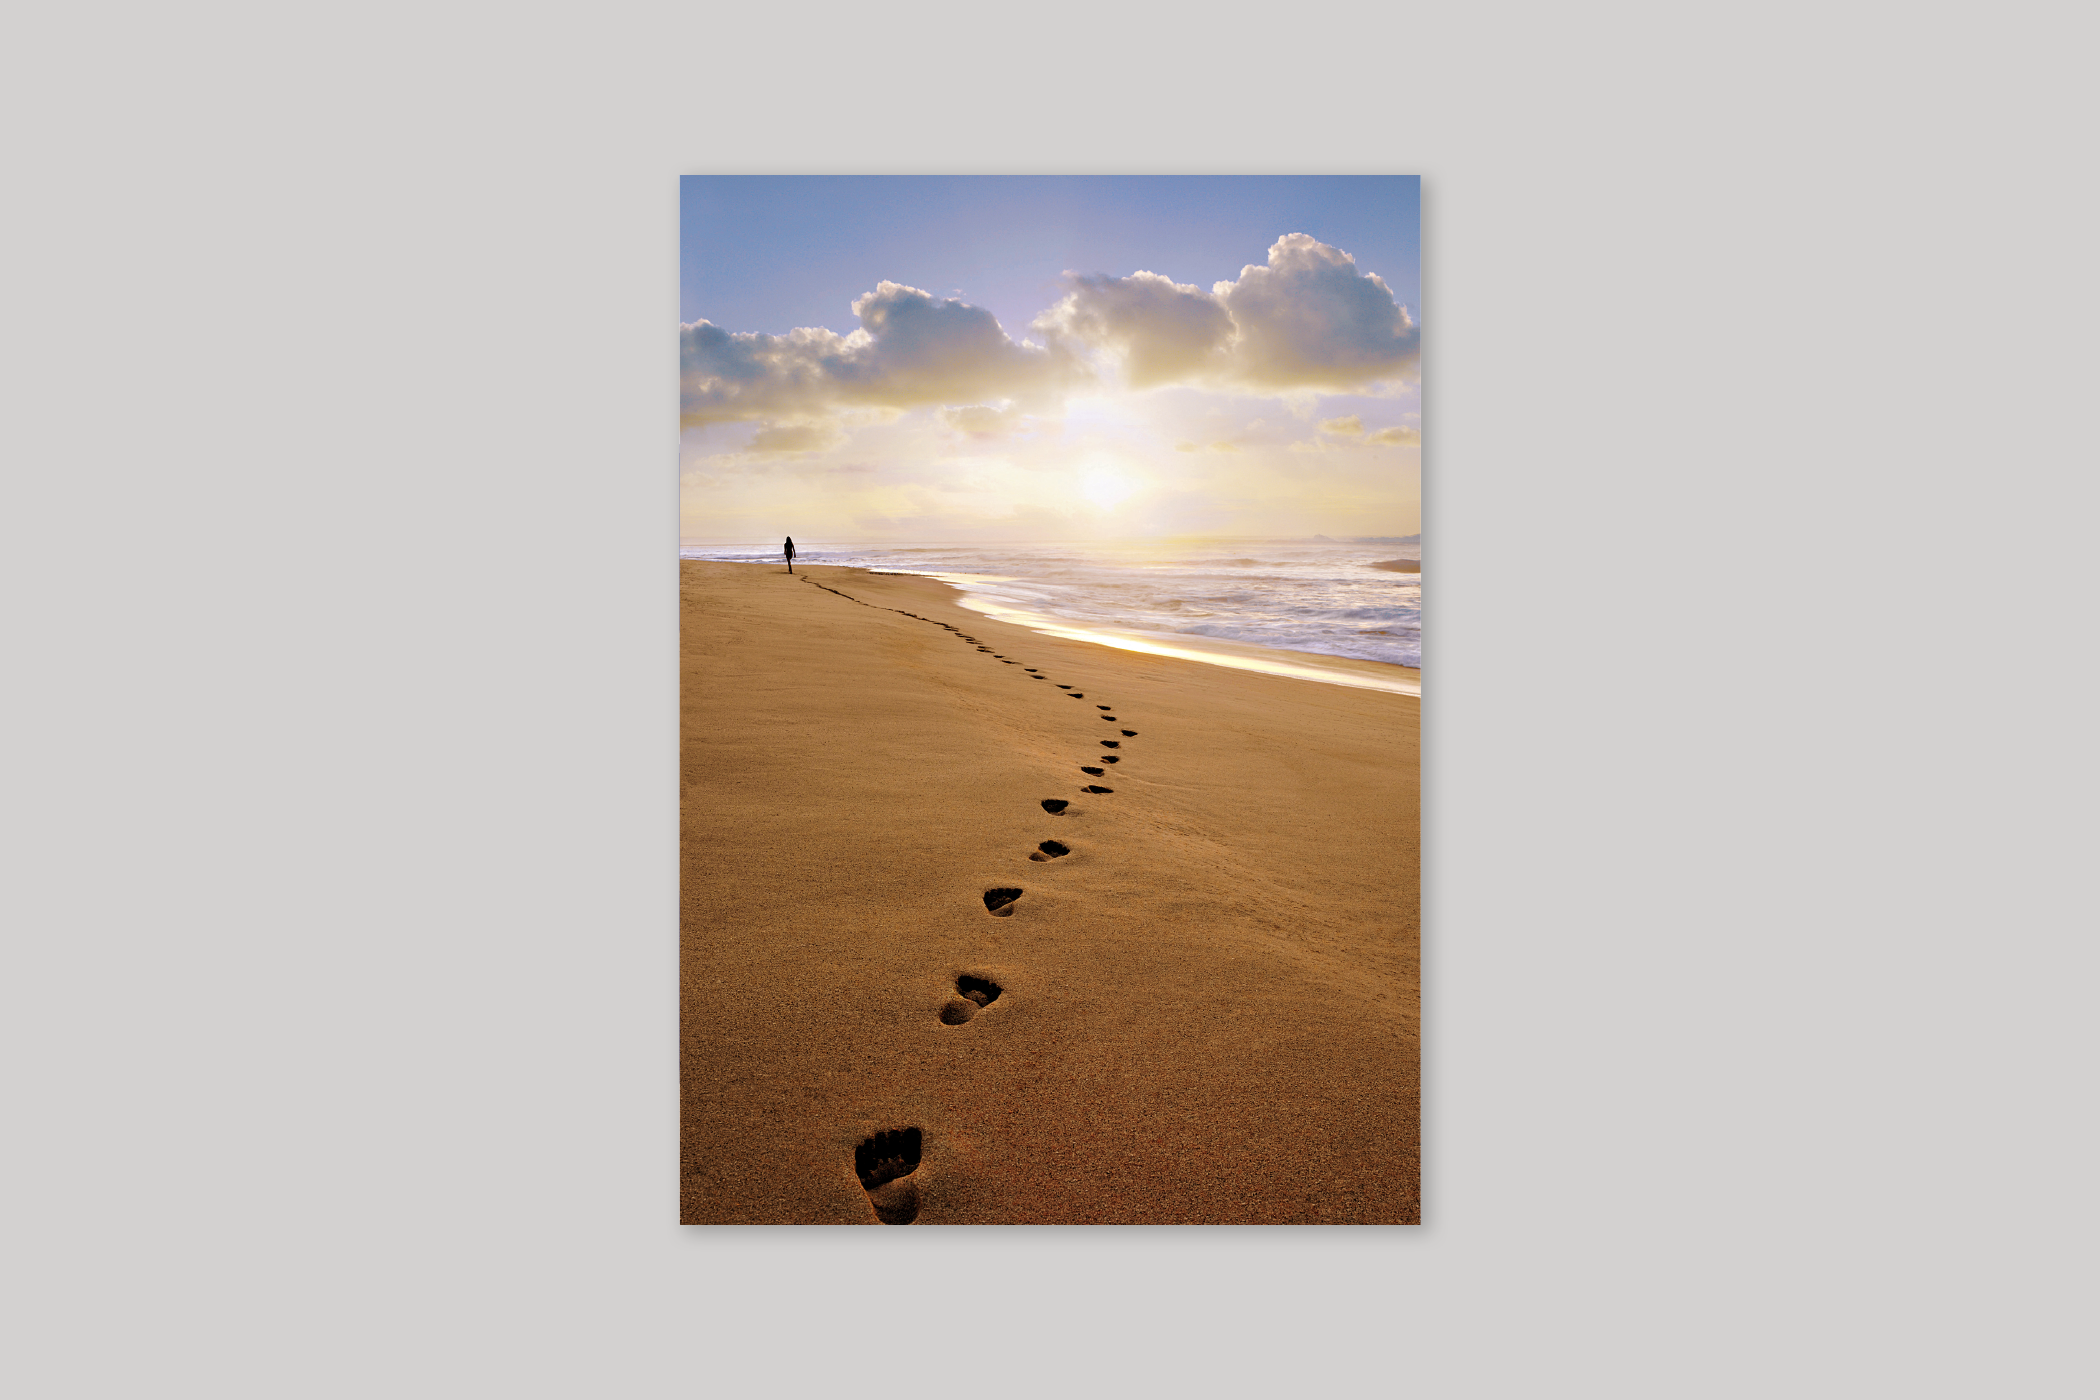 Footprints sympathy card from Exposure range of photographic cards by Icon.